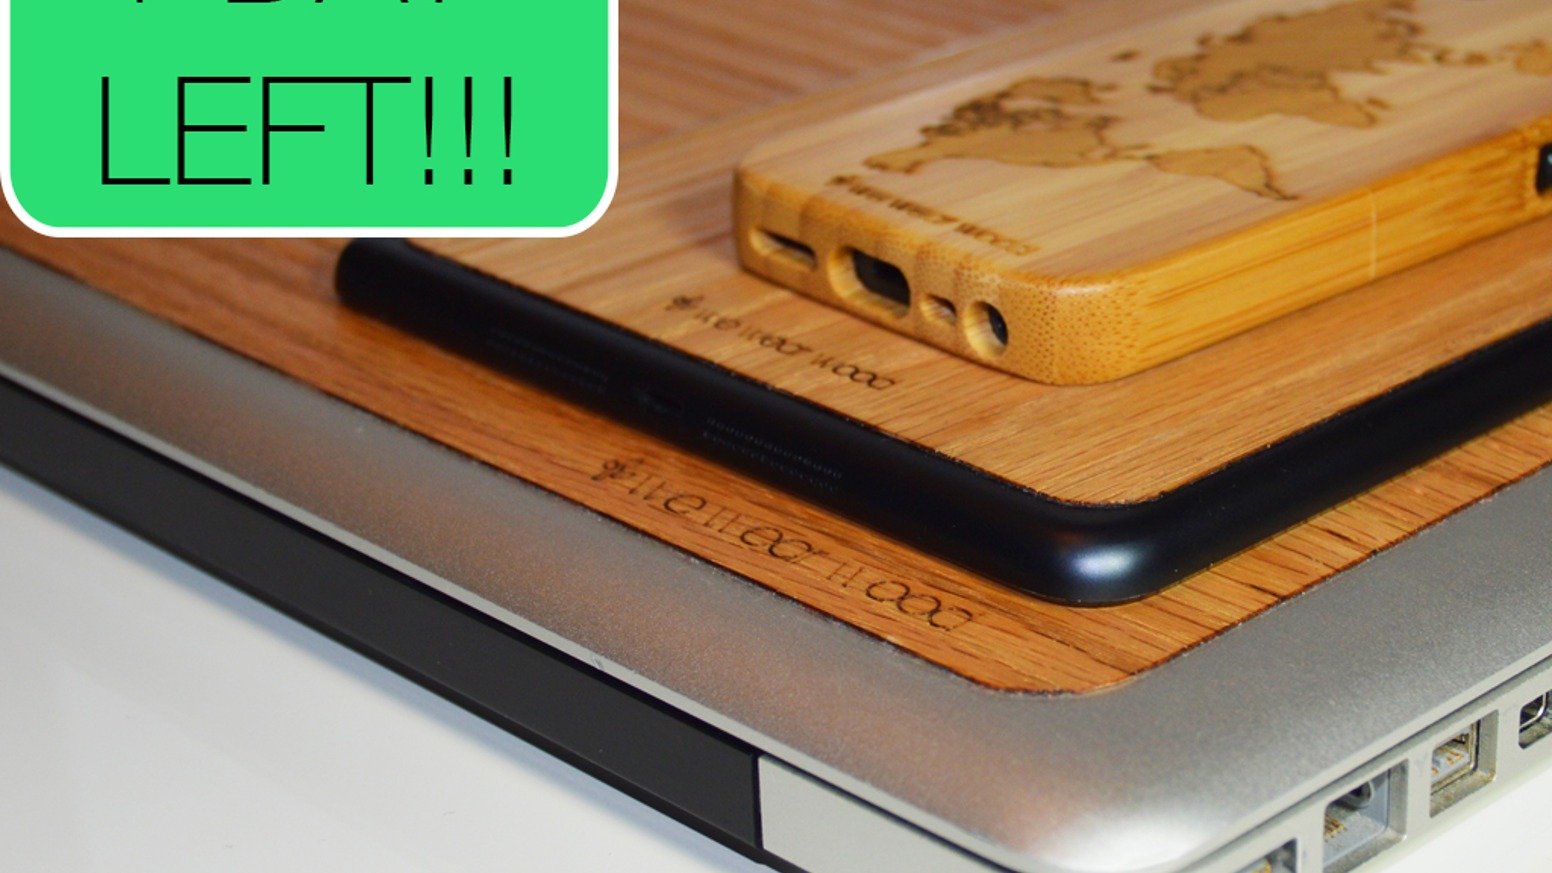 Personalize your Apple devices with a creative, eye-catching, natural wood cover and make your tech truly unique from the rest.